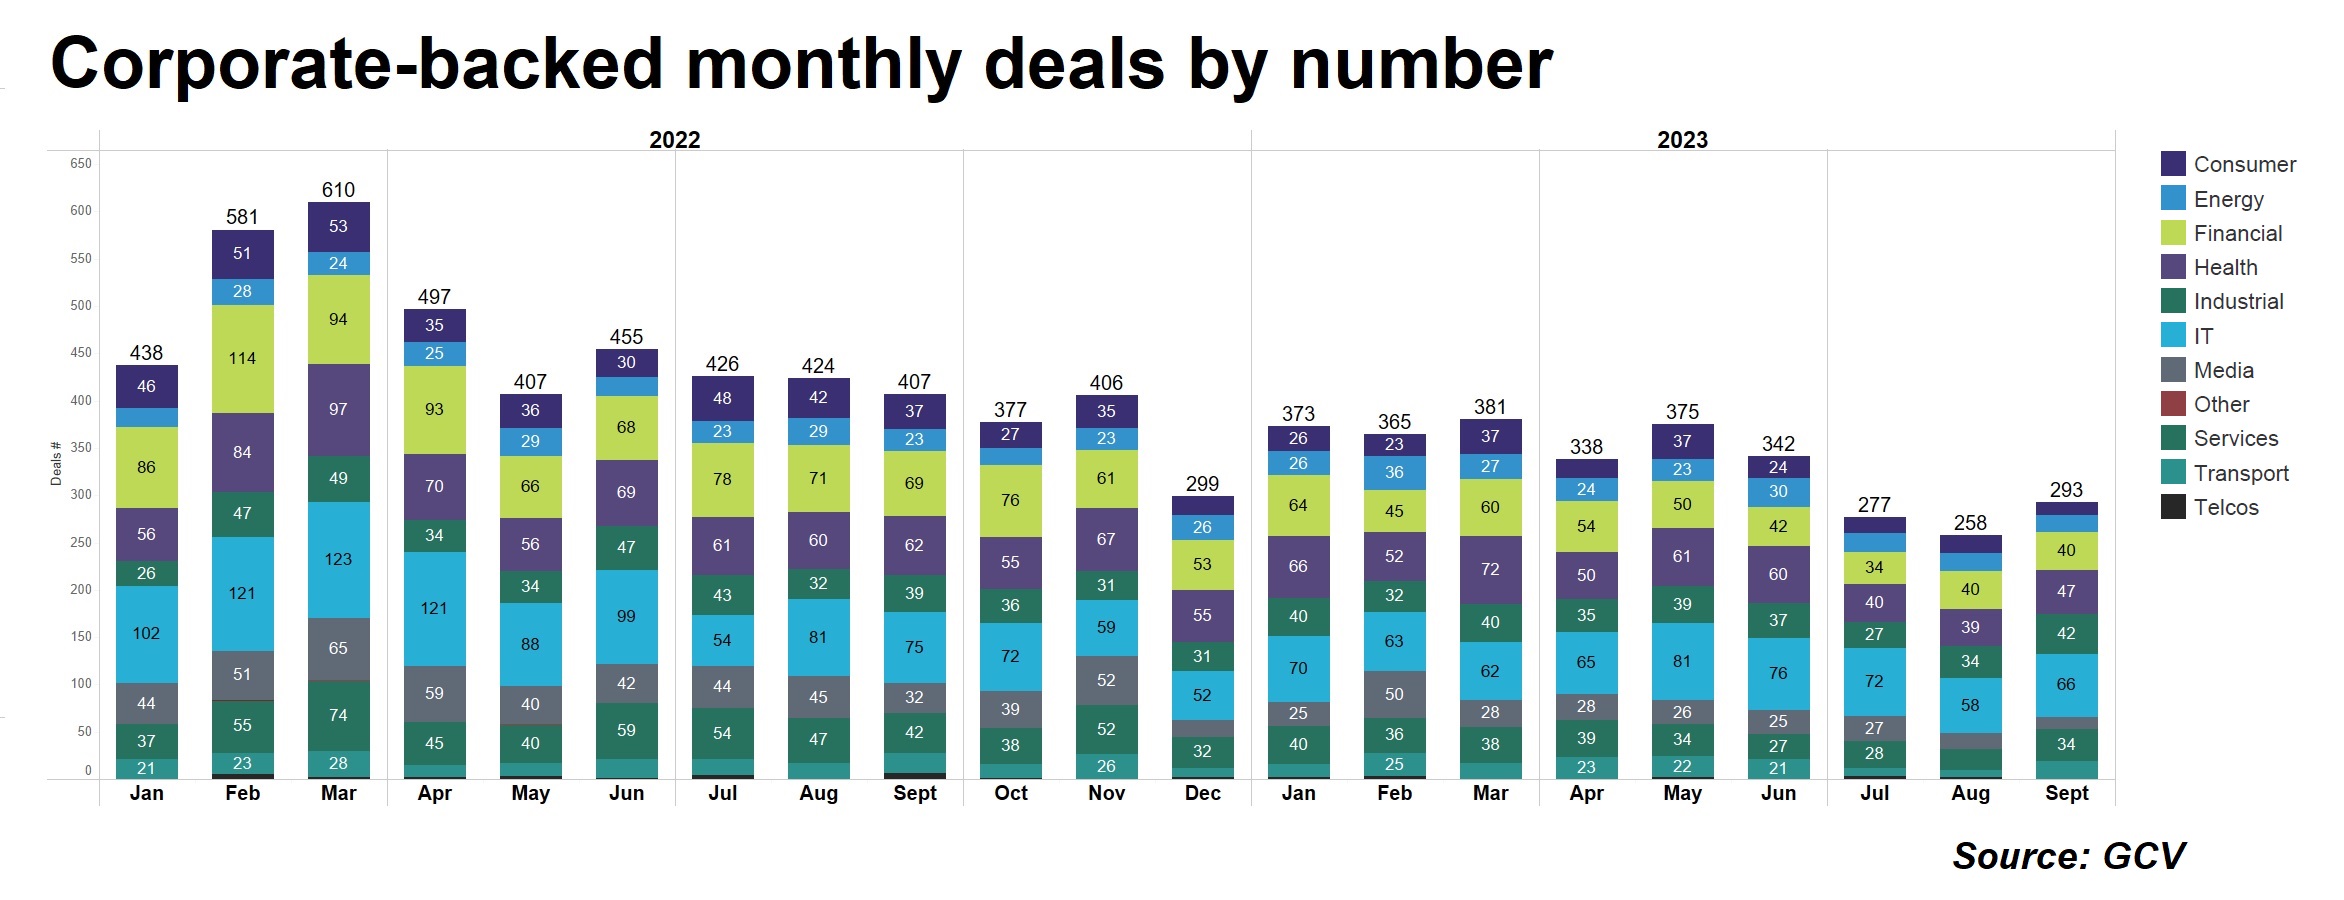 Stacked bar chart showing corporate-backed monthly deals by number and broken down by sector 2022-23. Source: GCV